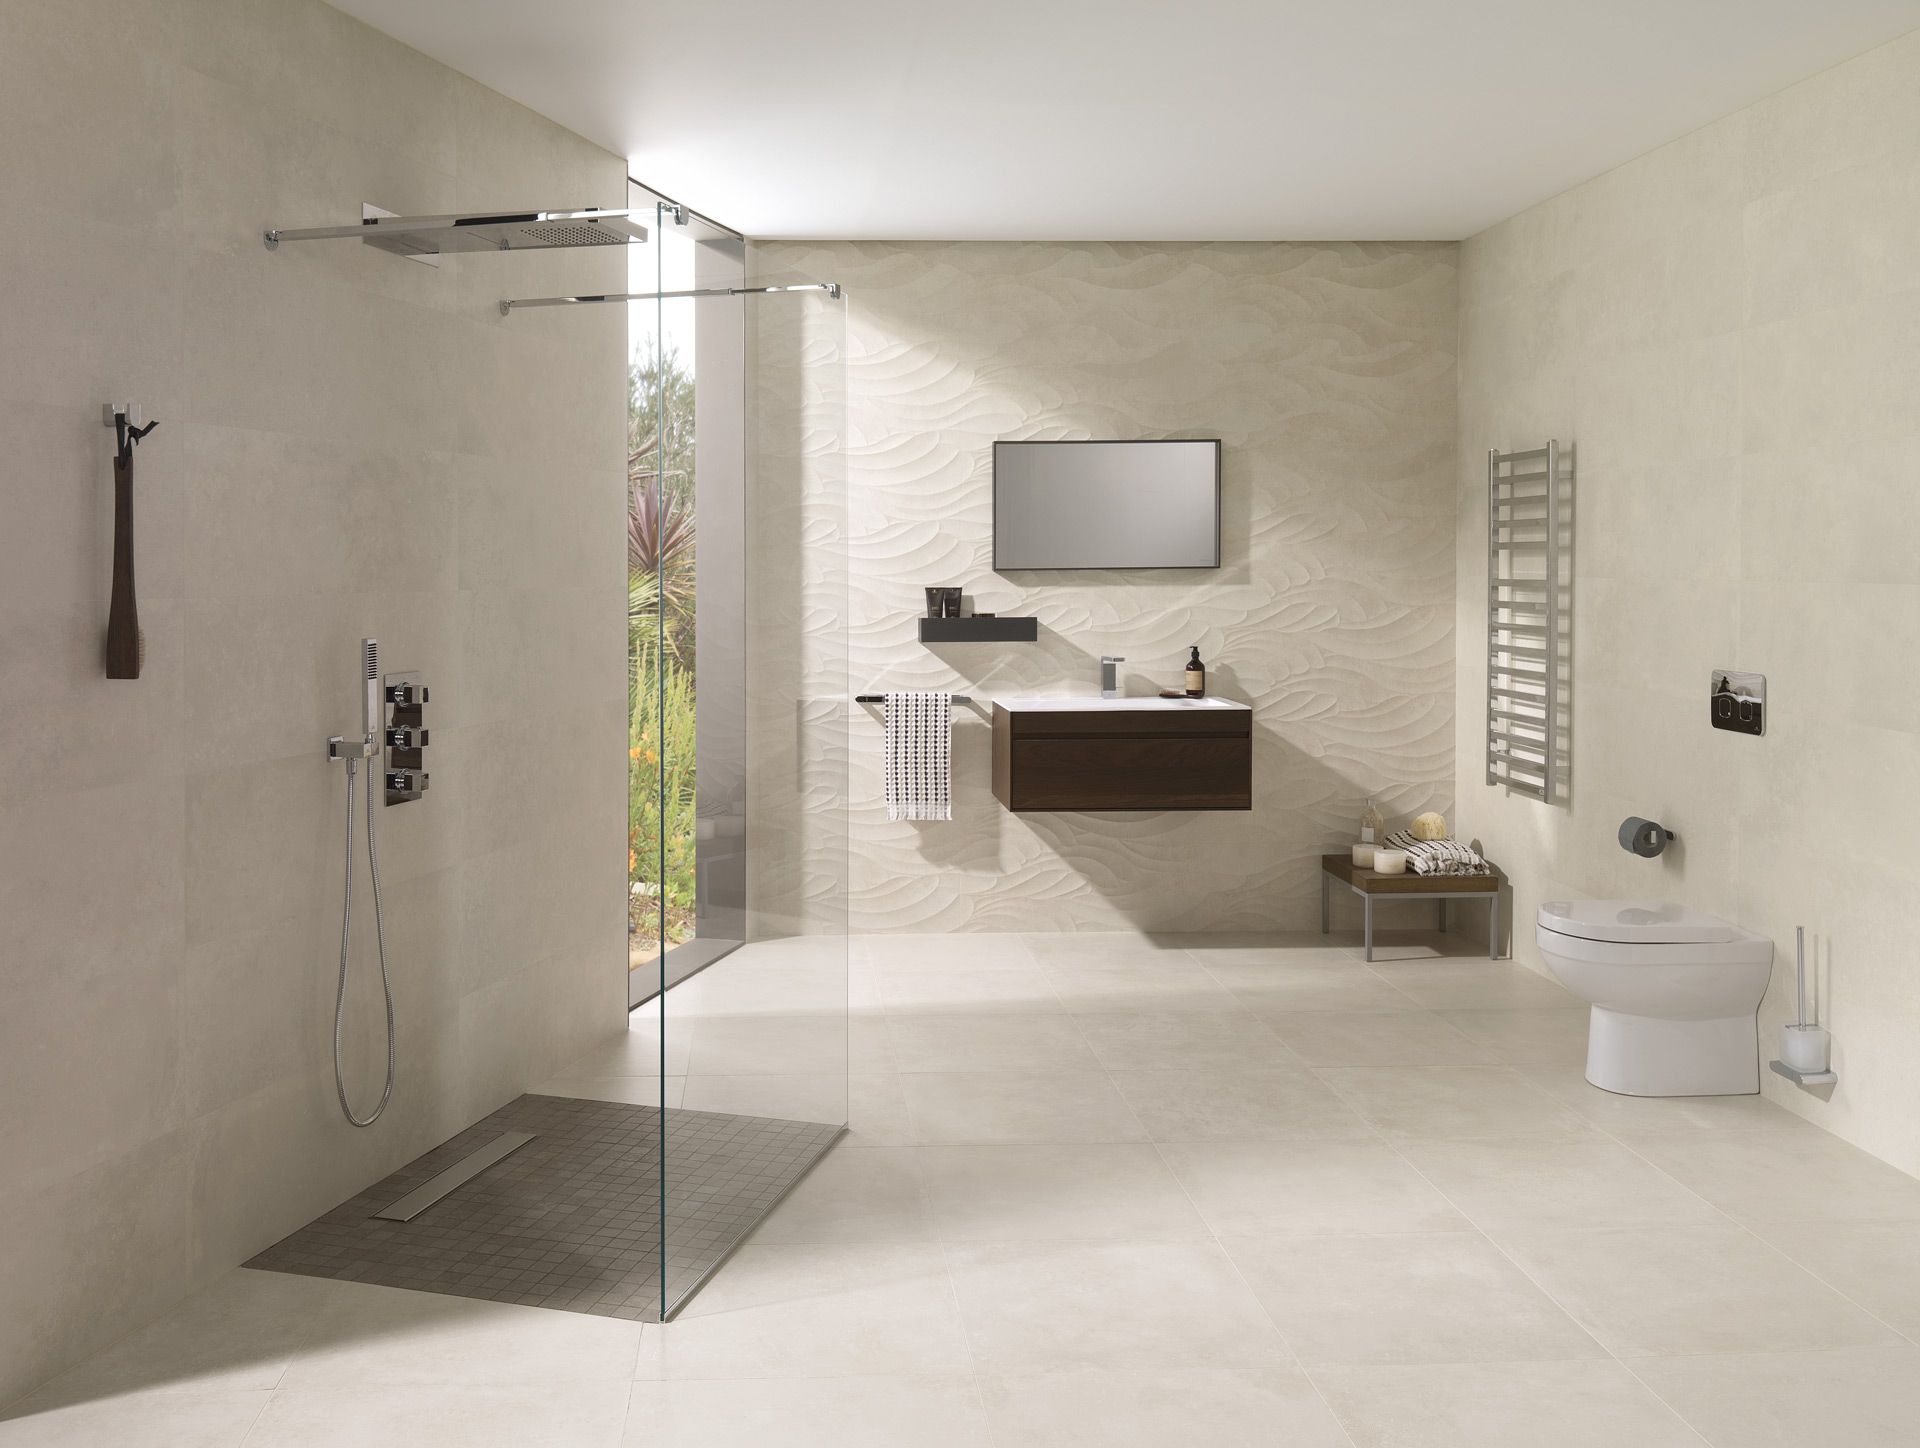 6.65 Square Meters of Porcelanosa Rhin Ivory Wall and Floor Tiles. 3.3x100cm per tile. 1.33m2 per